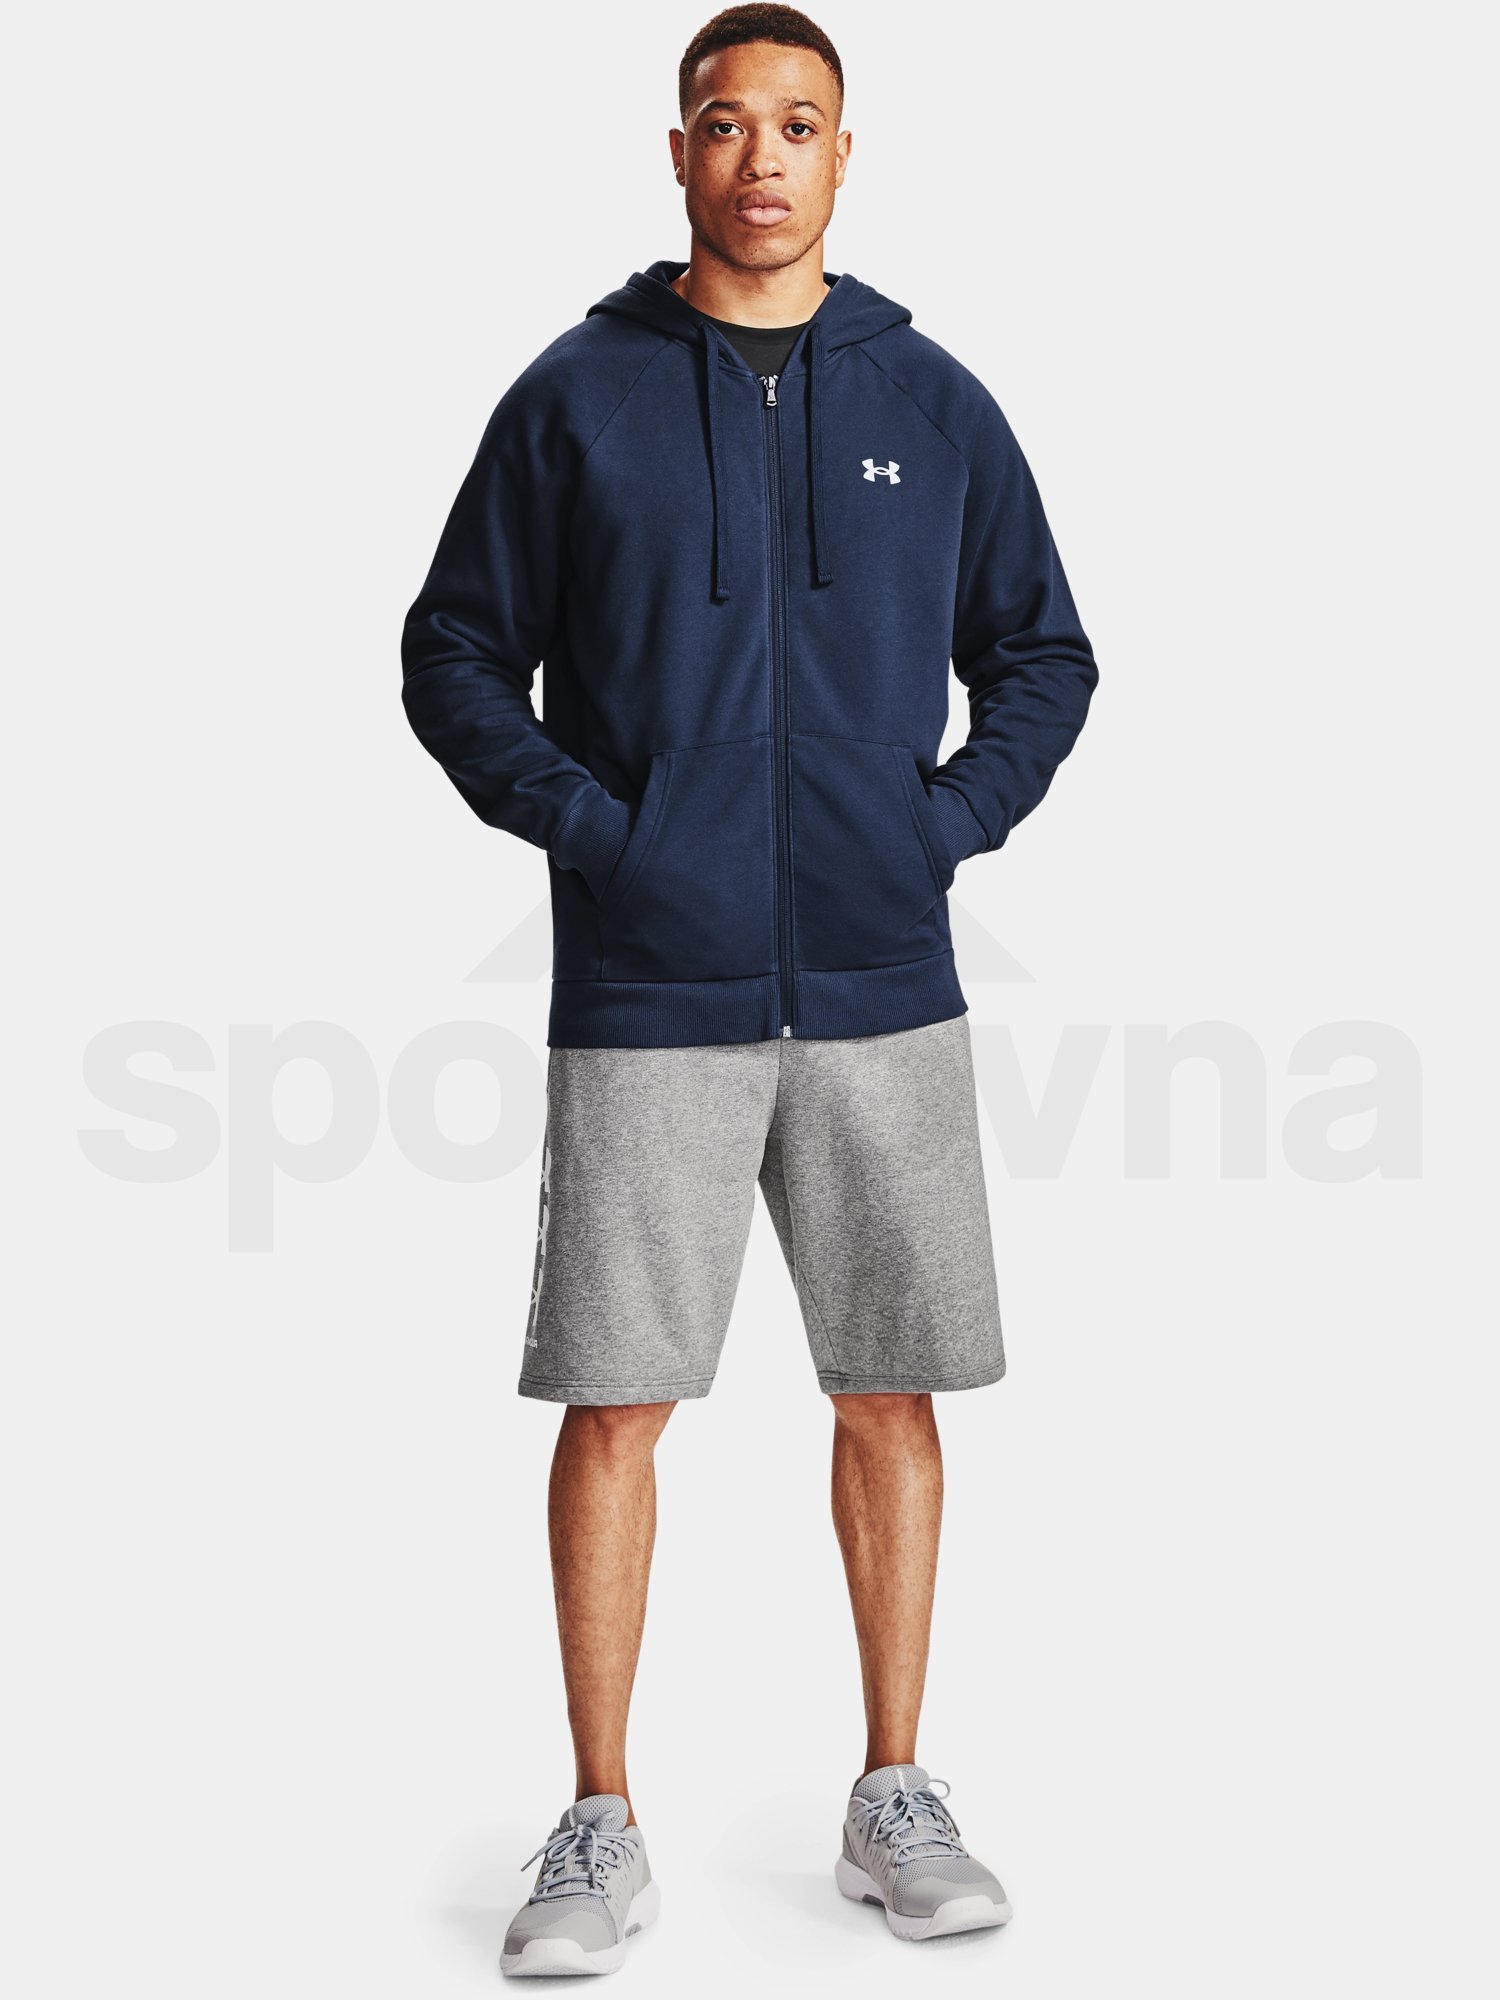 Mikina Under Armour UA Rival Cotton FZ Hoodie-NVY